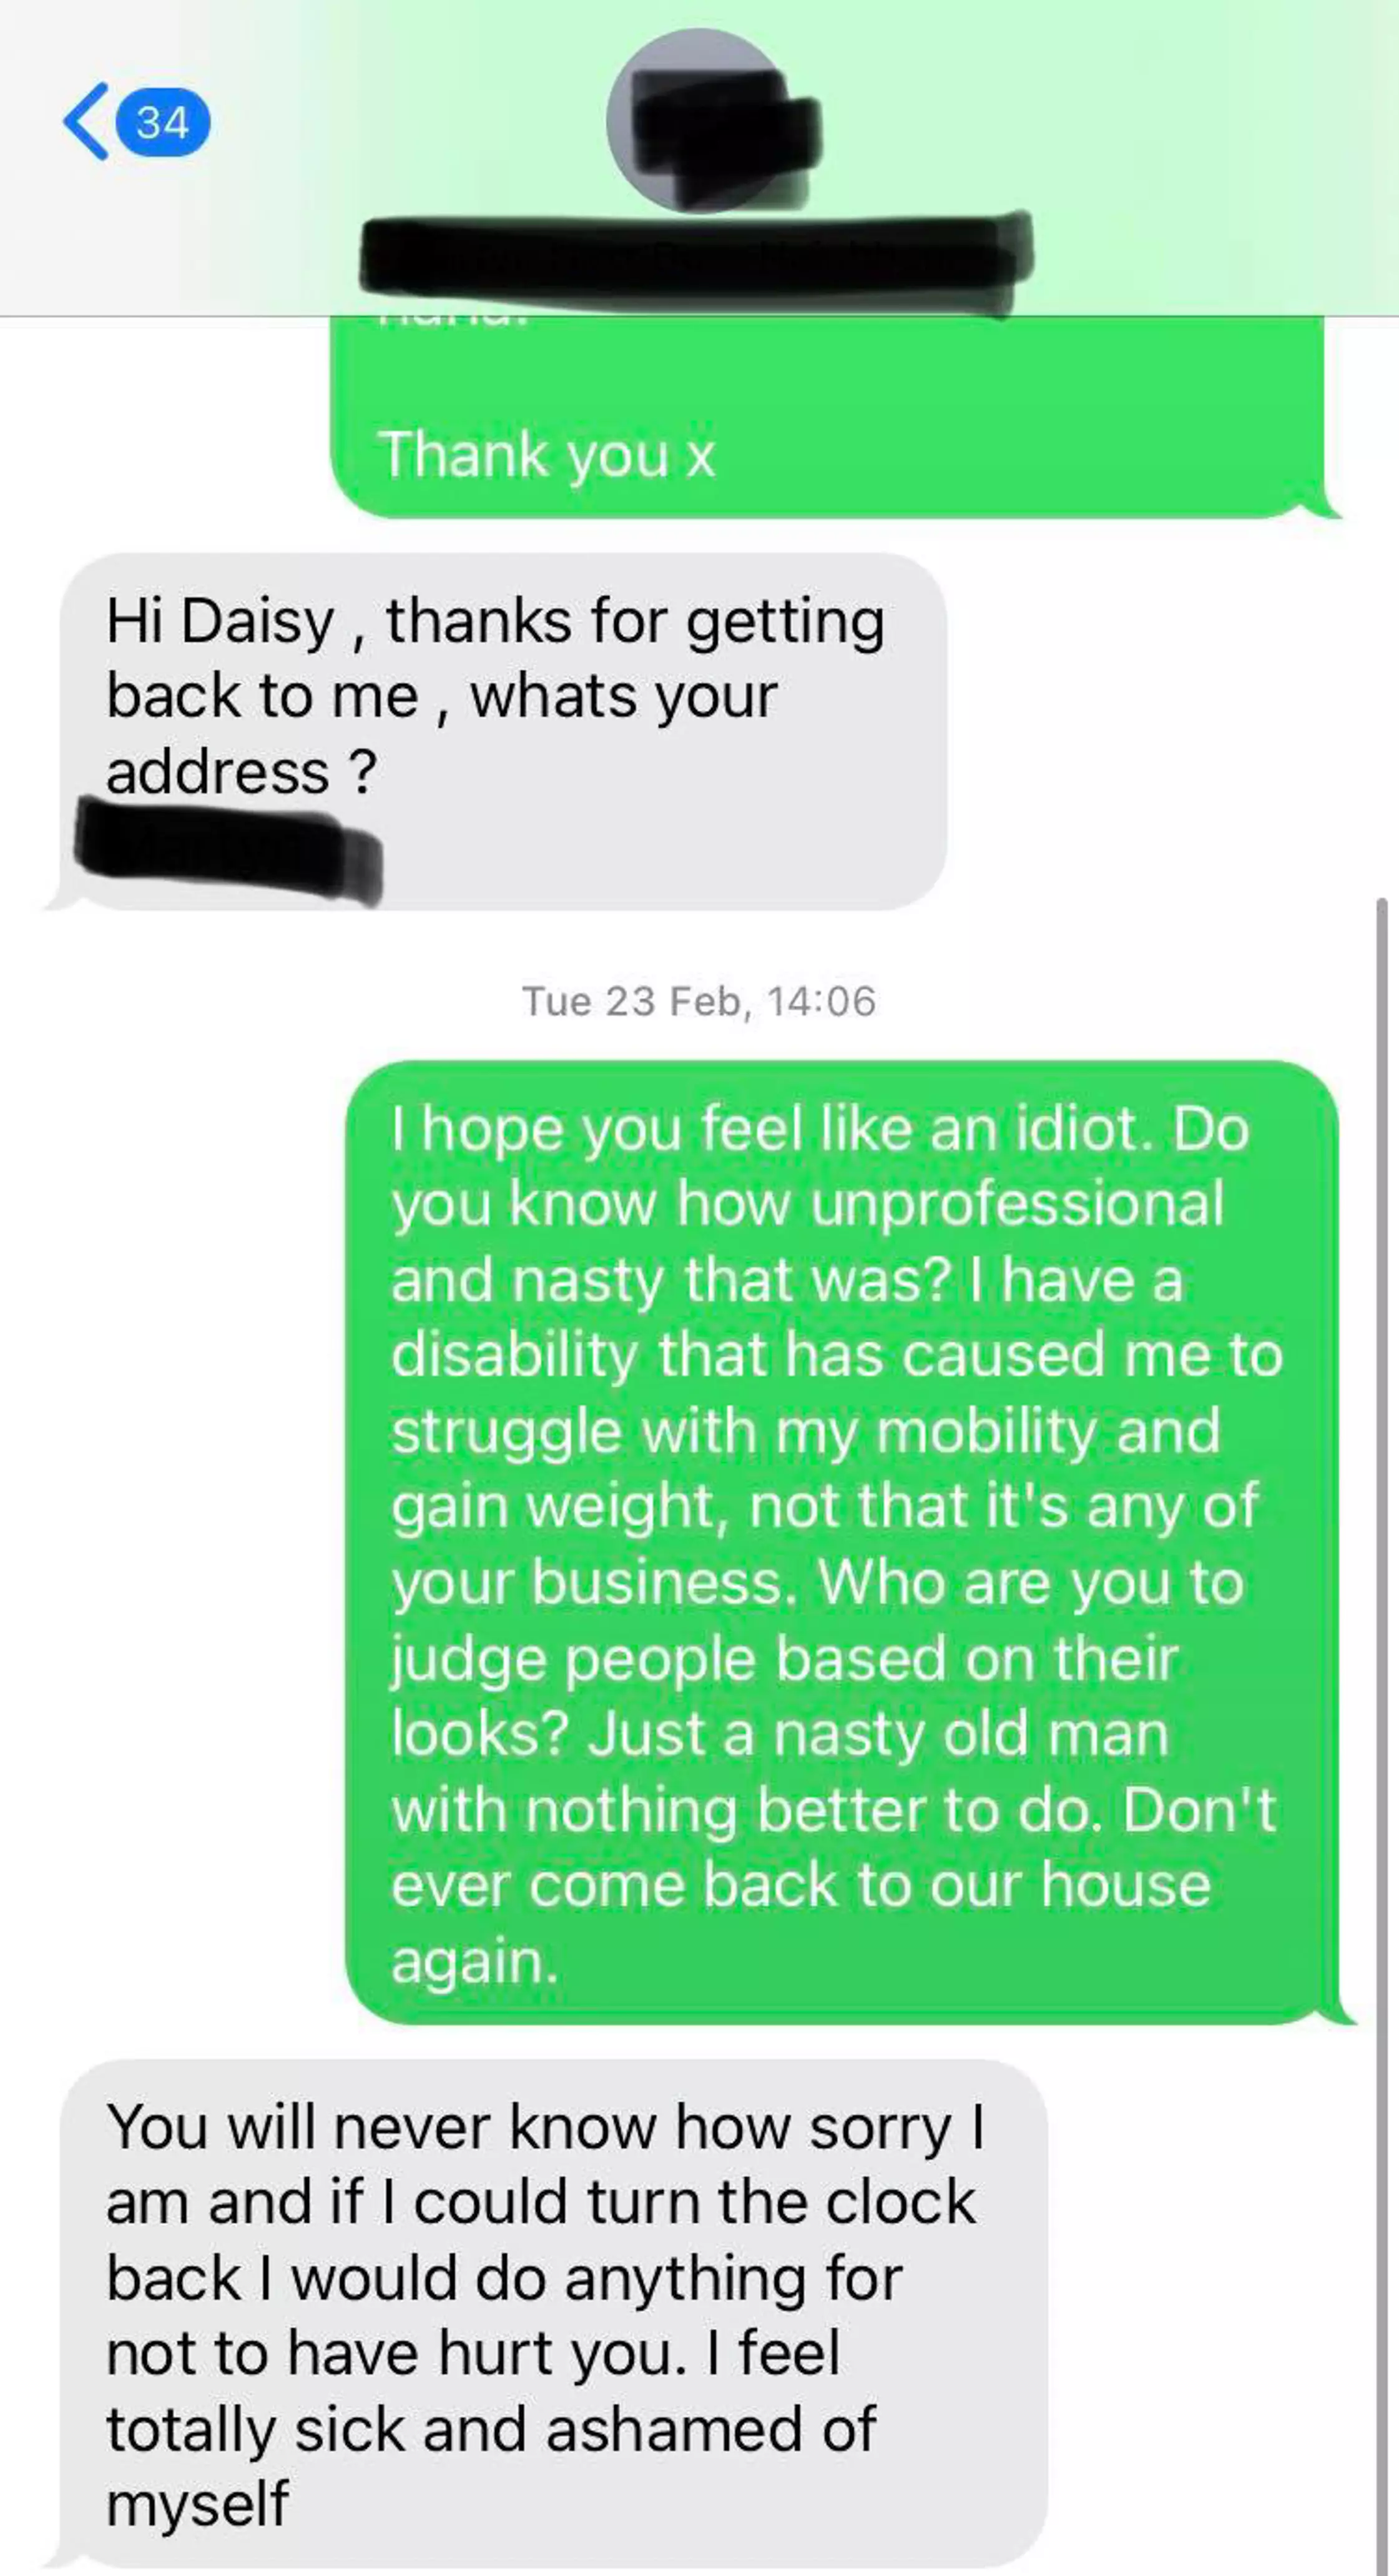 The woman text the roofer and he apologised profusely (